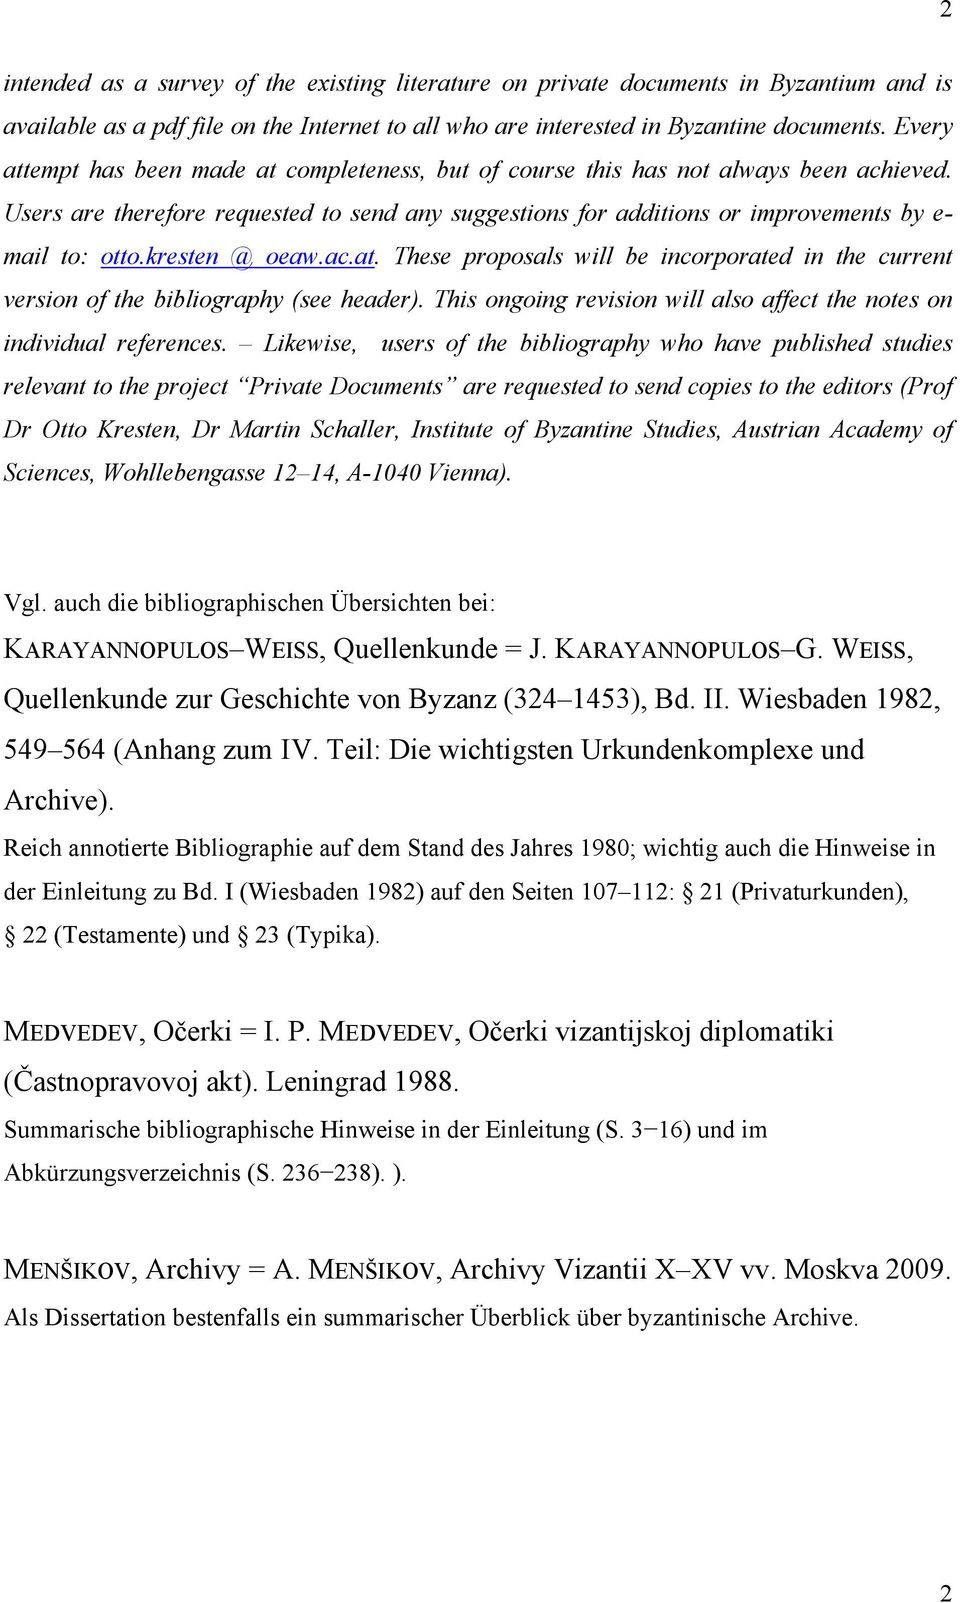 kresten @ oeaw.ac.at. These proposals will be incorporated in the current version of the bibliography (see header). This ongoing revision will also affect the notes on individual references.